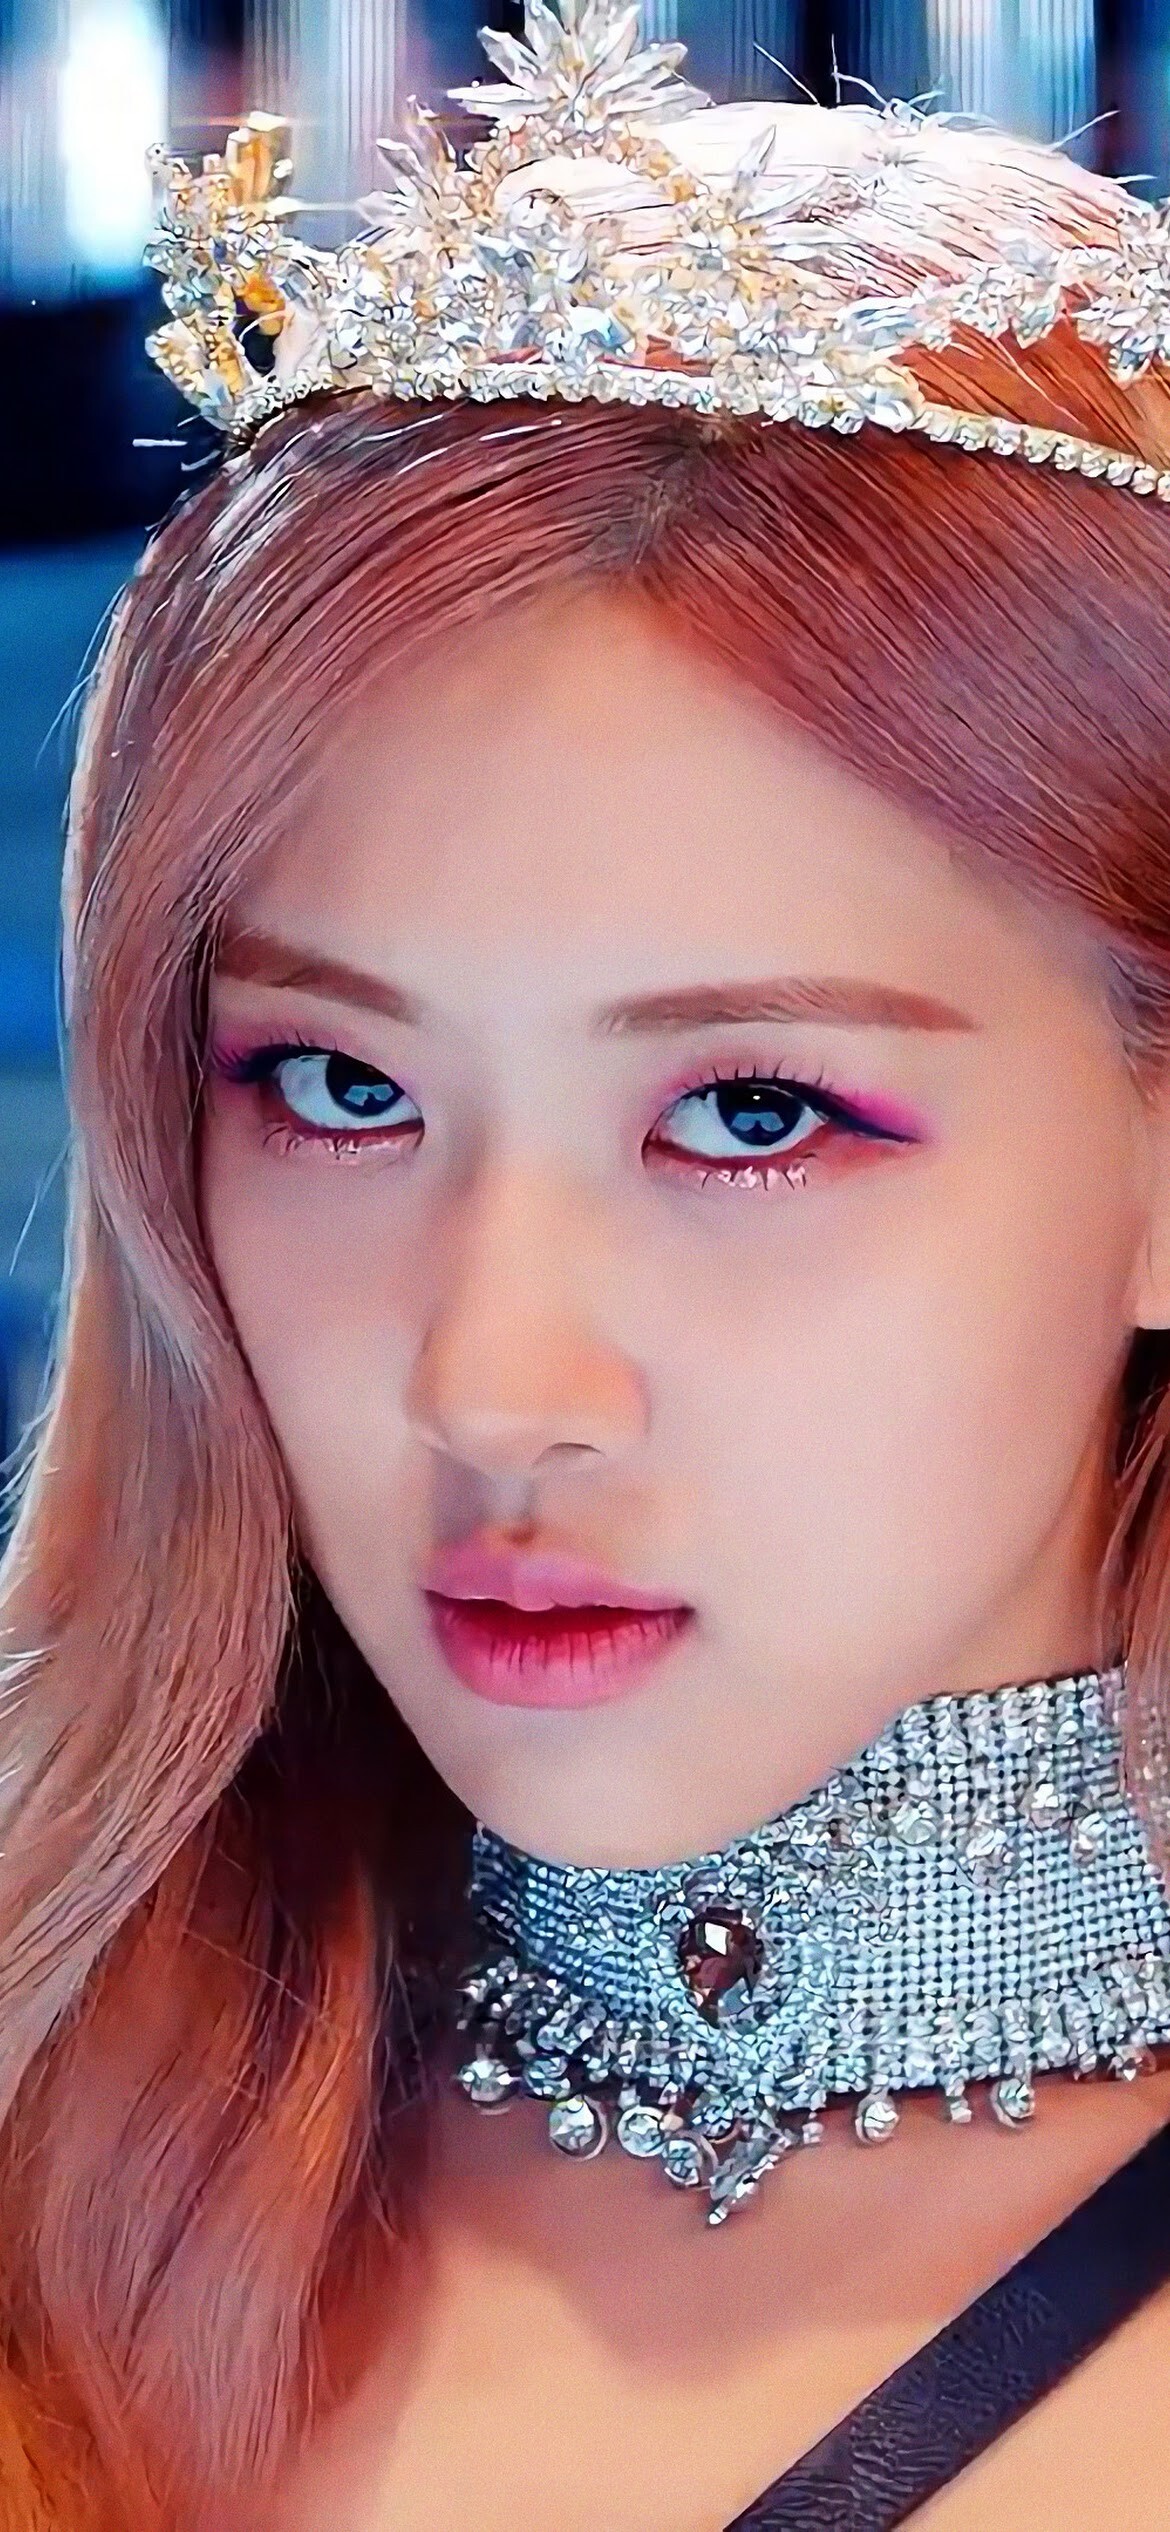 BLACKPINK: Kill This Love, Rose, trained for four years before debuting as a member of the group in August 2016. 1170x2540 HD Wallpaper.